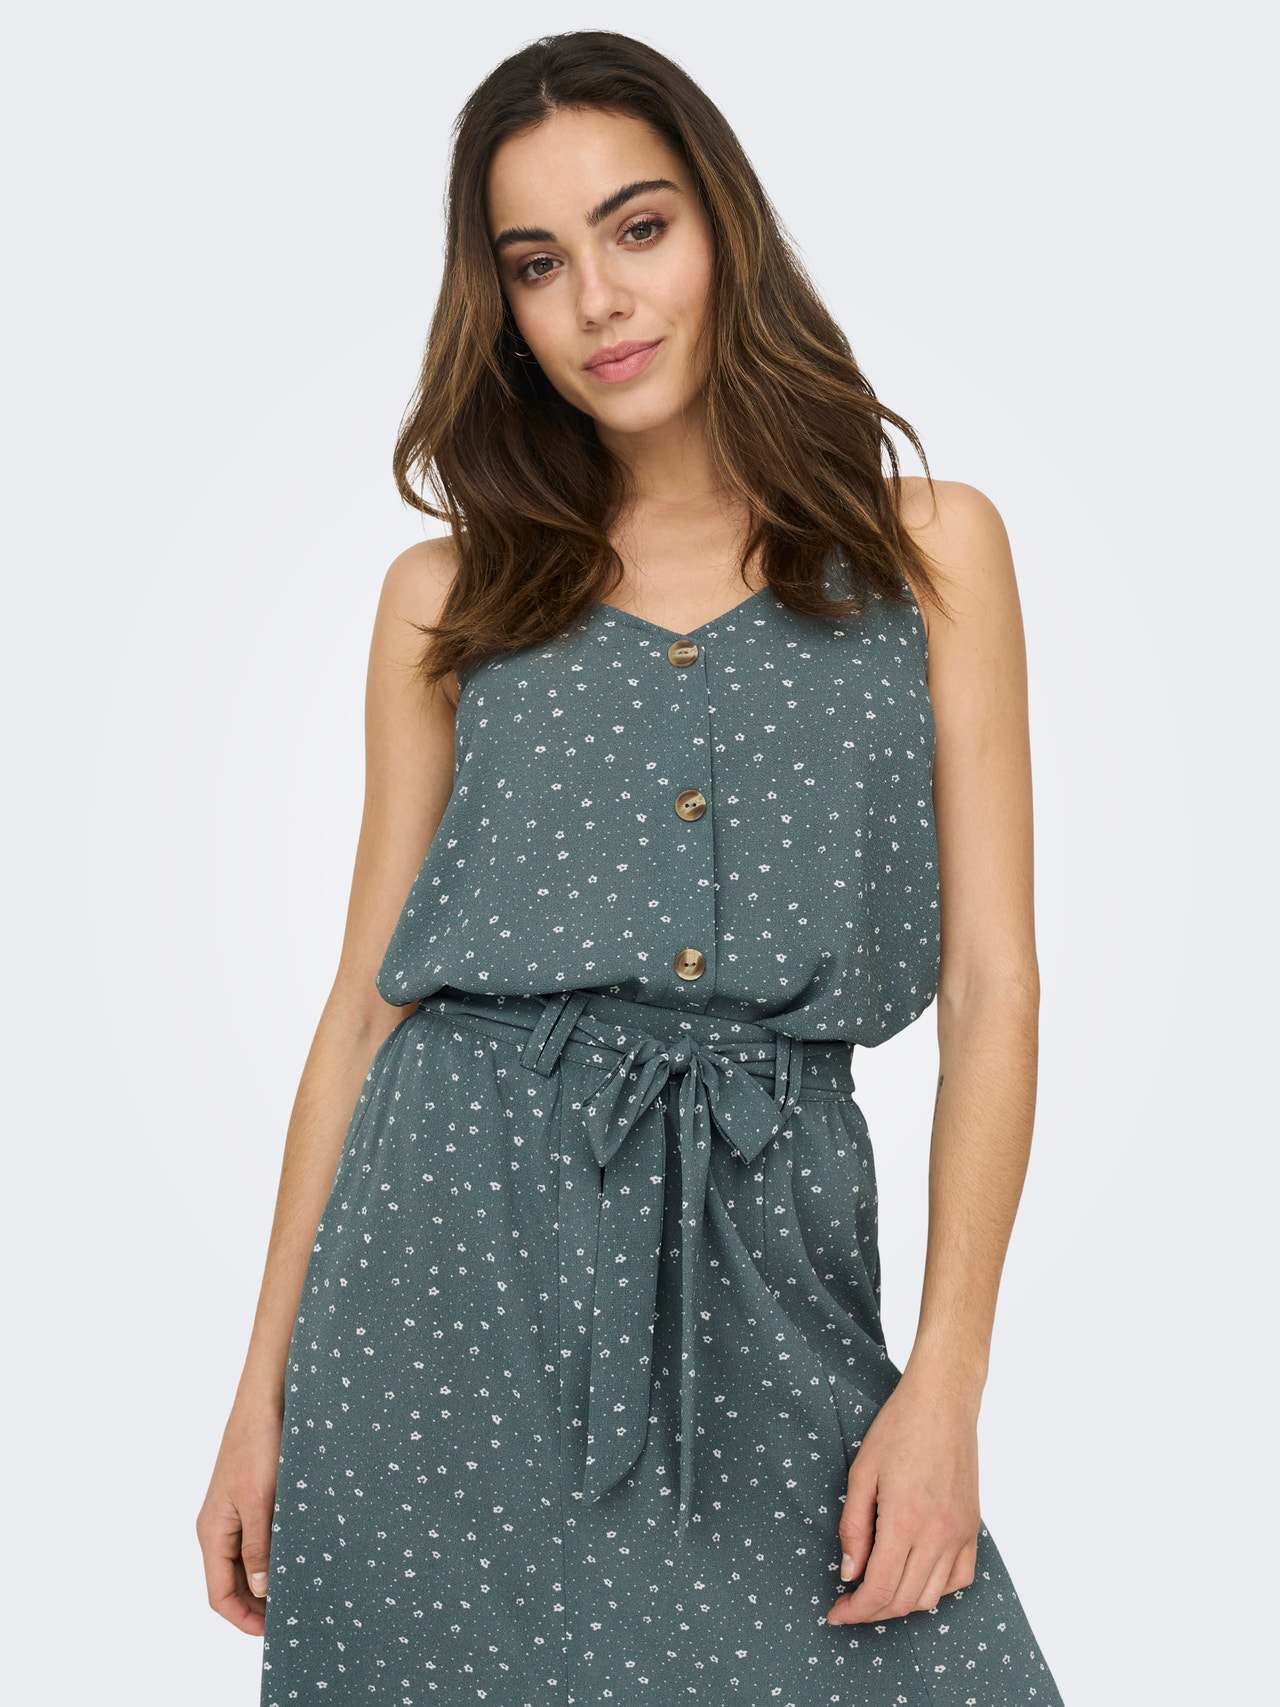 ONLY Button detailed Top -Balsam Green - 15271370